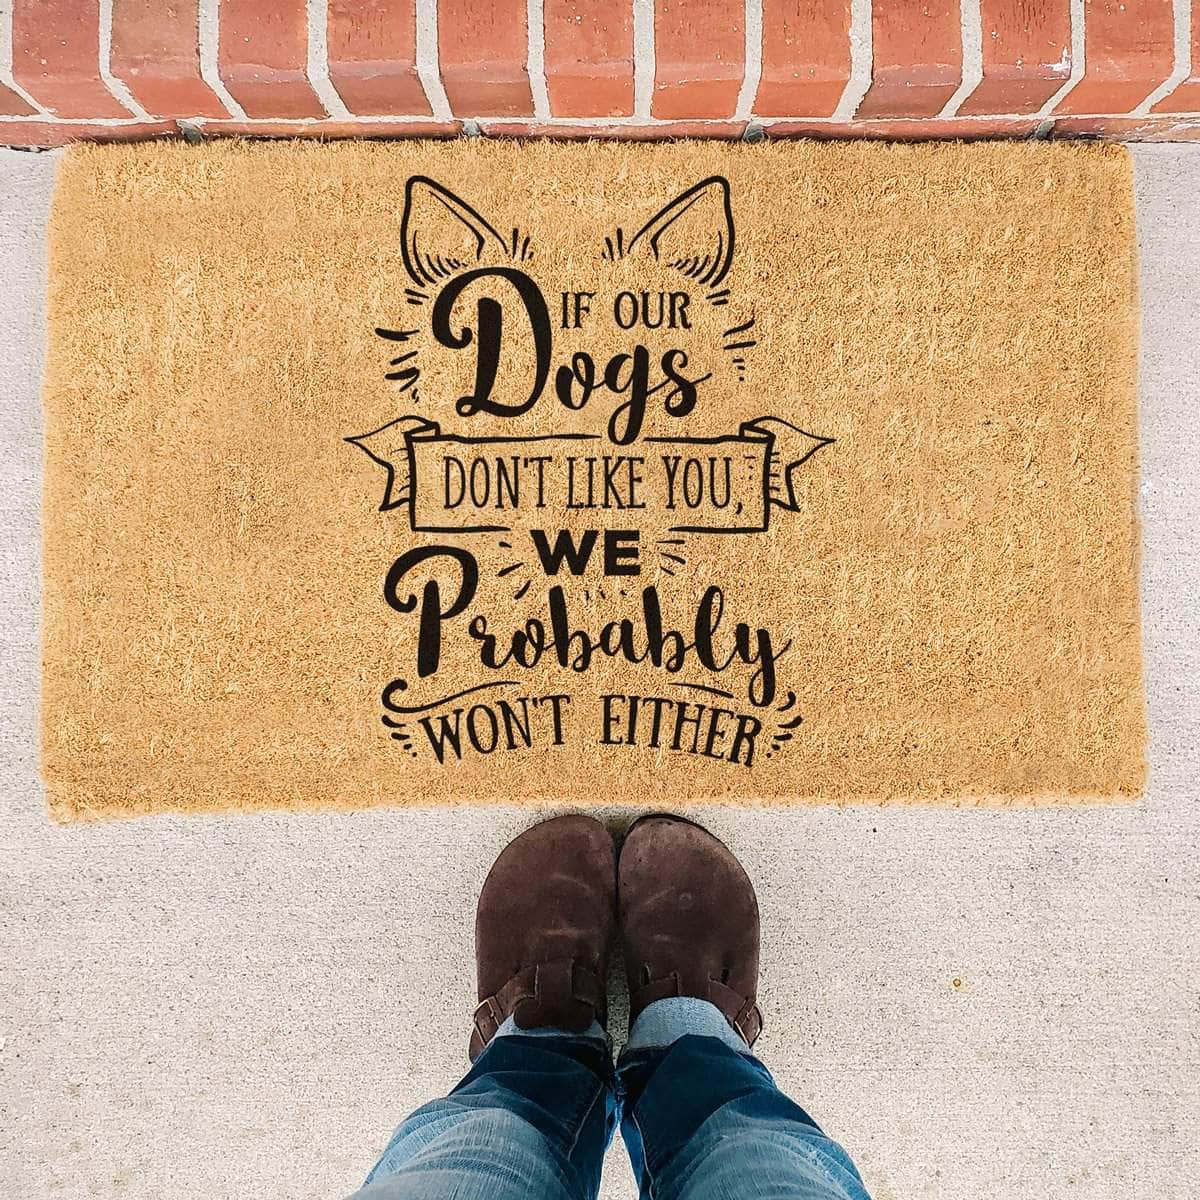 If Our Dog Doesn't Like You - Doormat